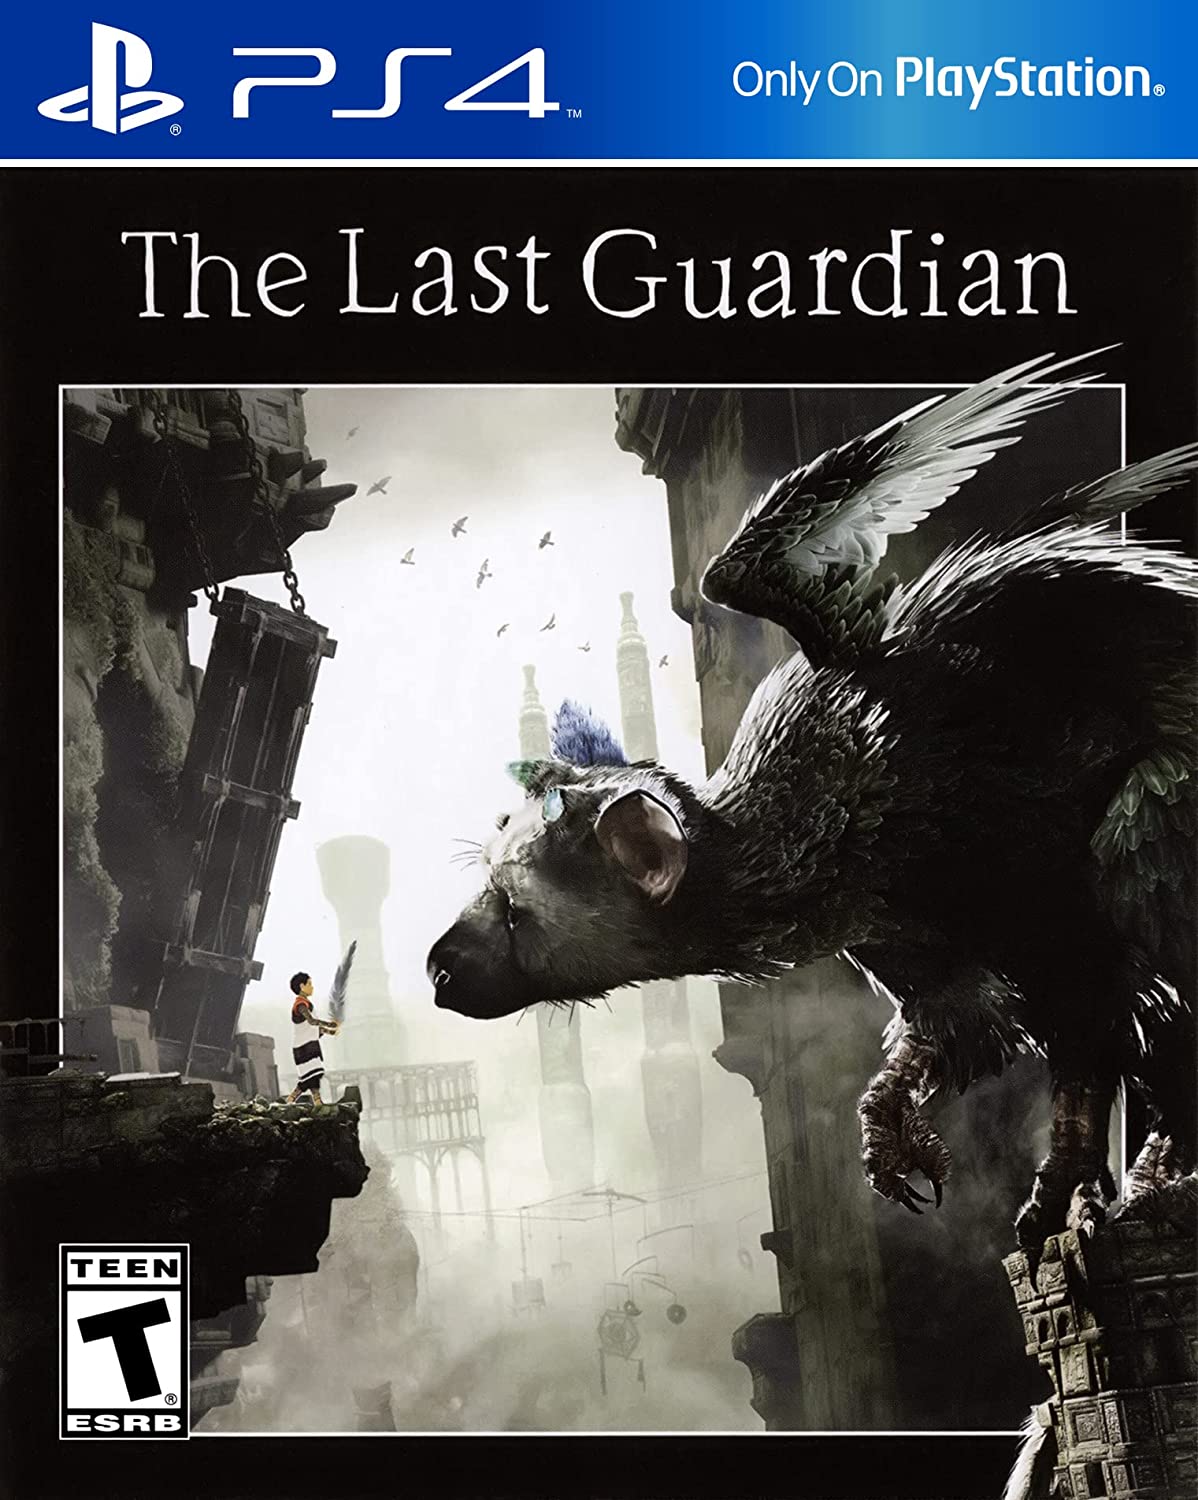 The Last Guardian, The Last Guardian, PlayStation.Blog